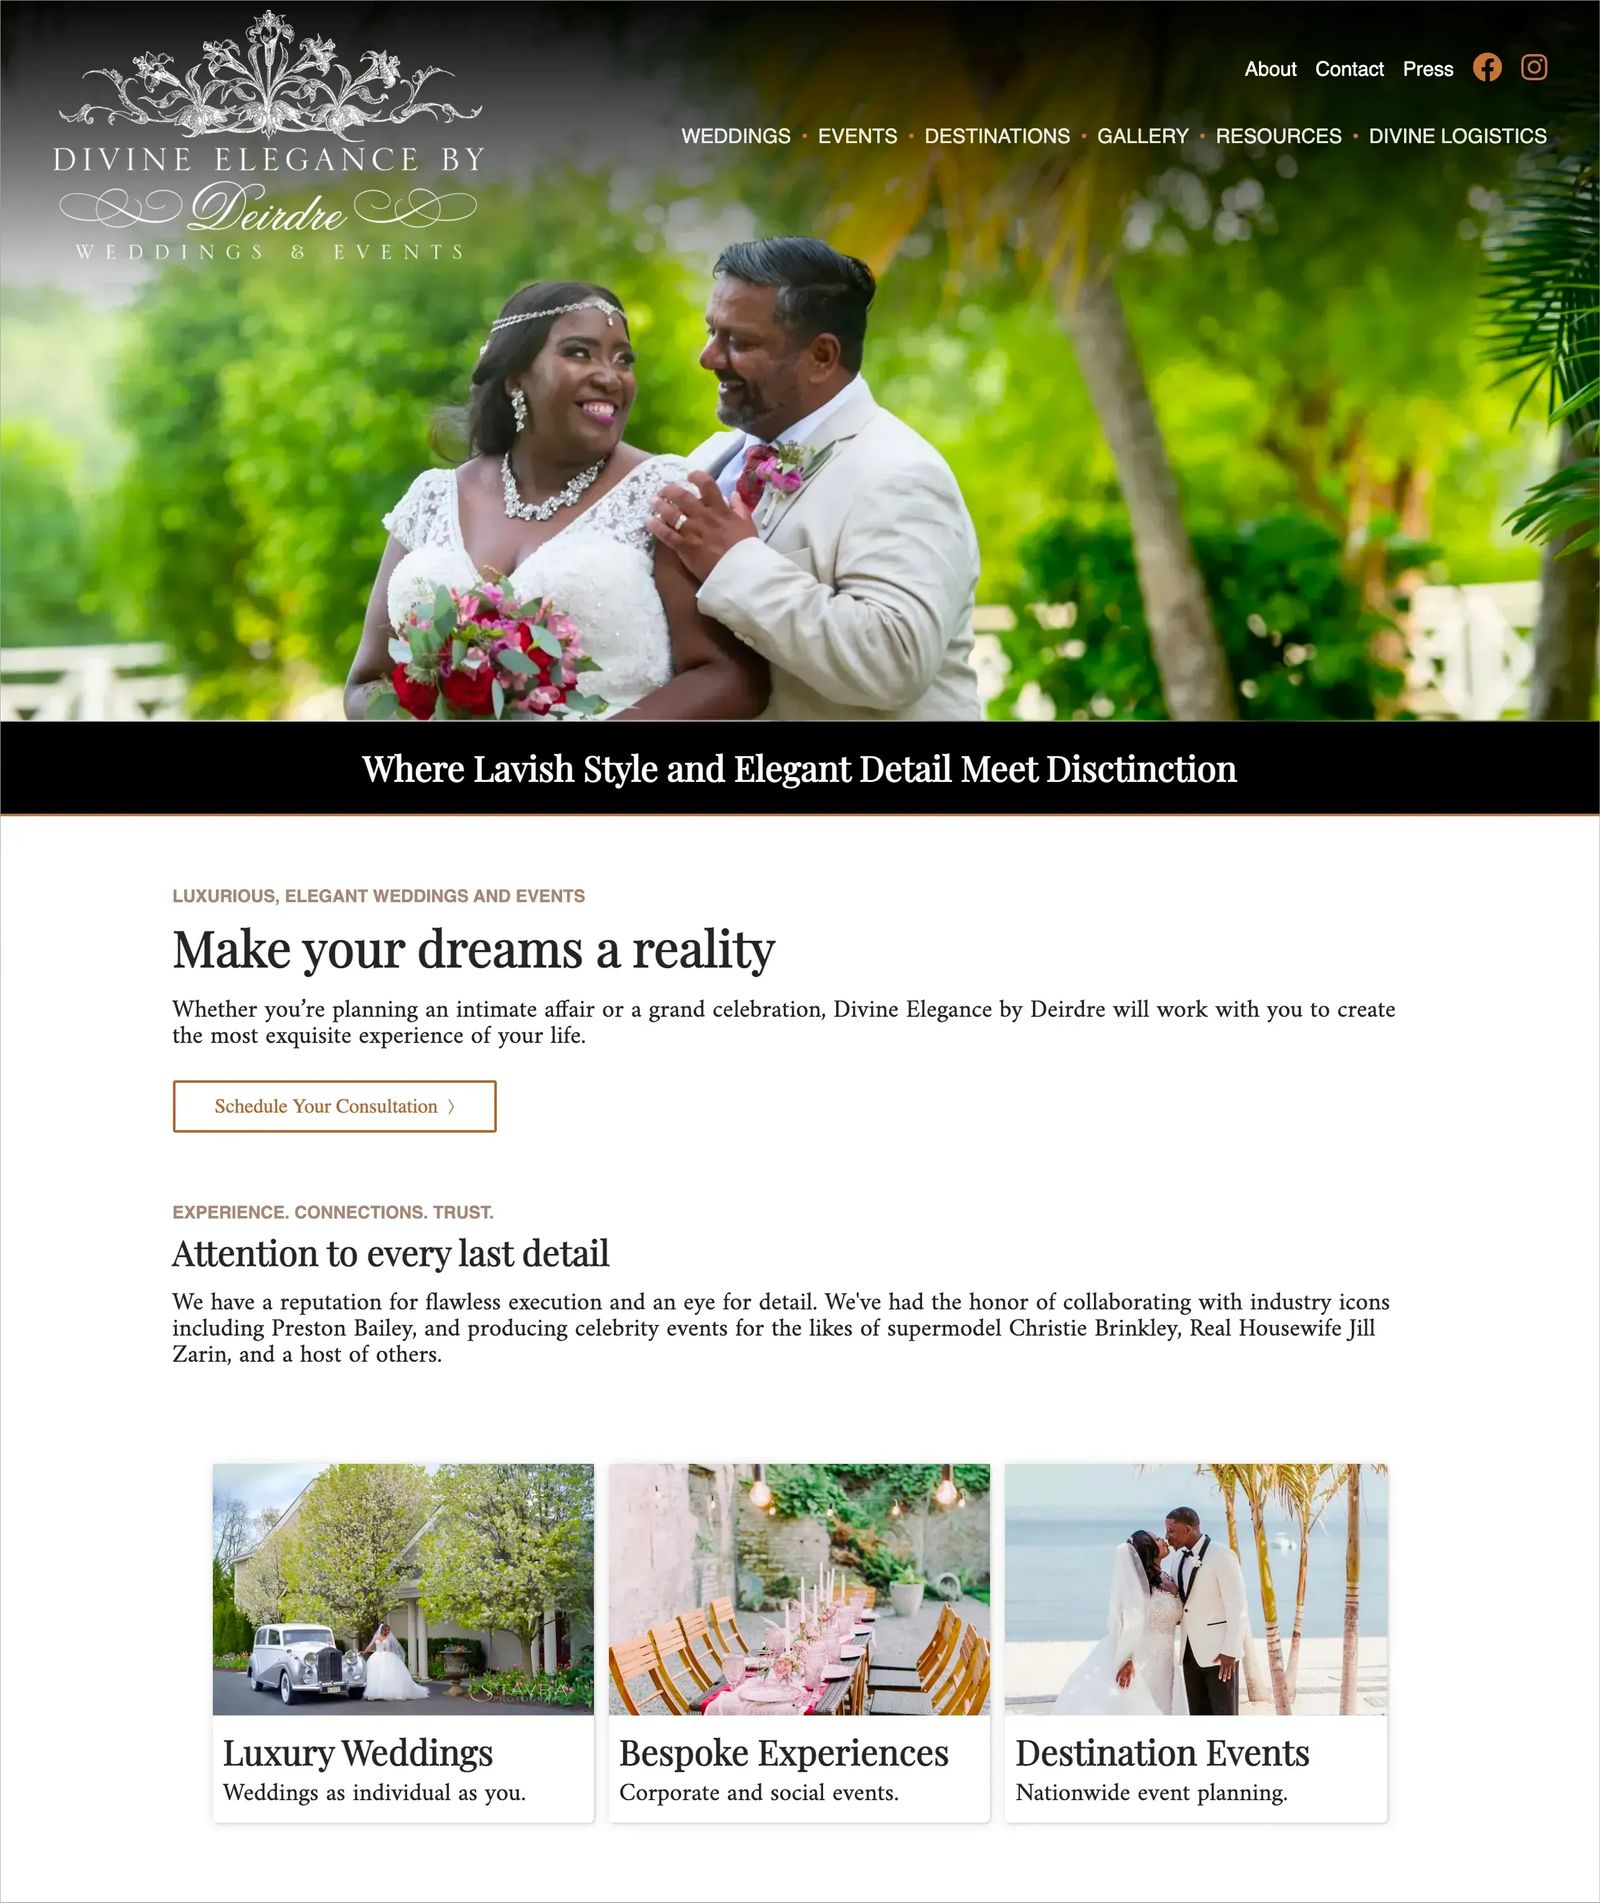 Screenshot of Divine Elegance by Deirdre wedding planner homepage. An example of an effective featured services section.